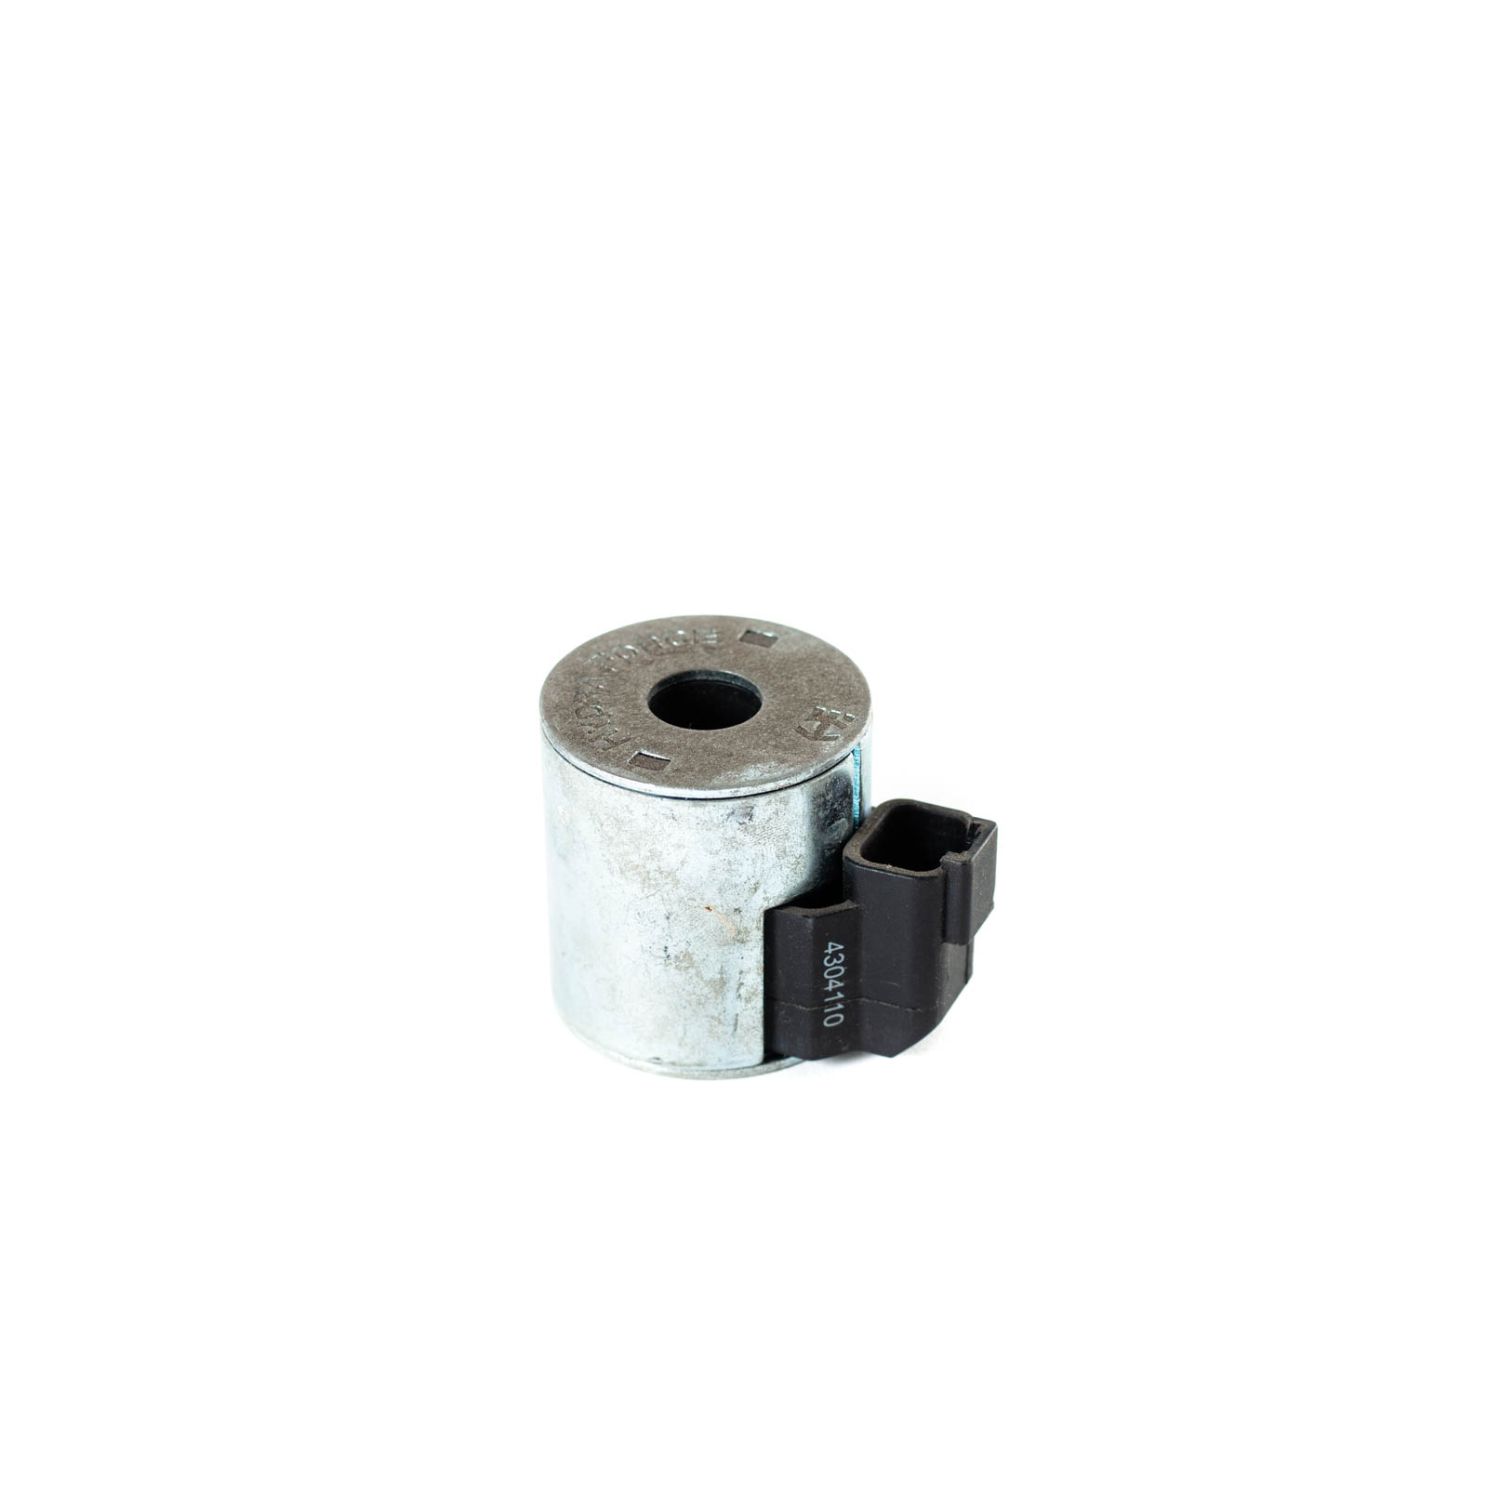 Fasse 12 Volt New Style Coil for Remote Master Valve